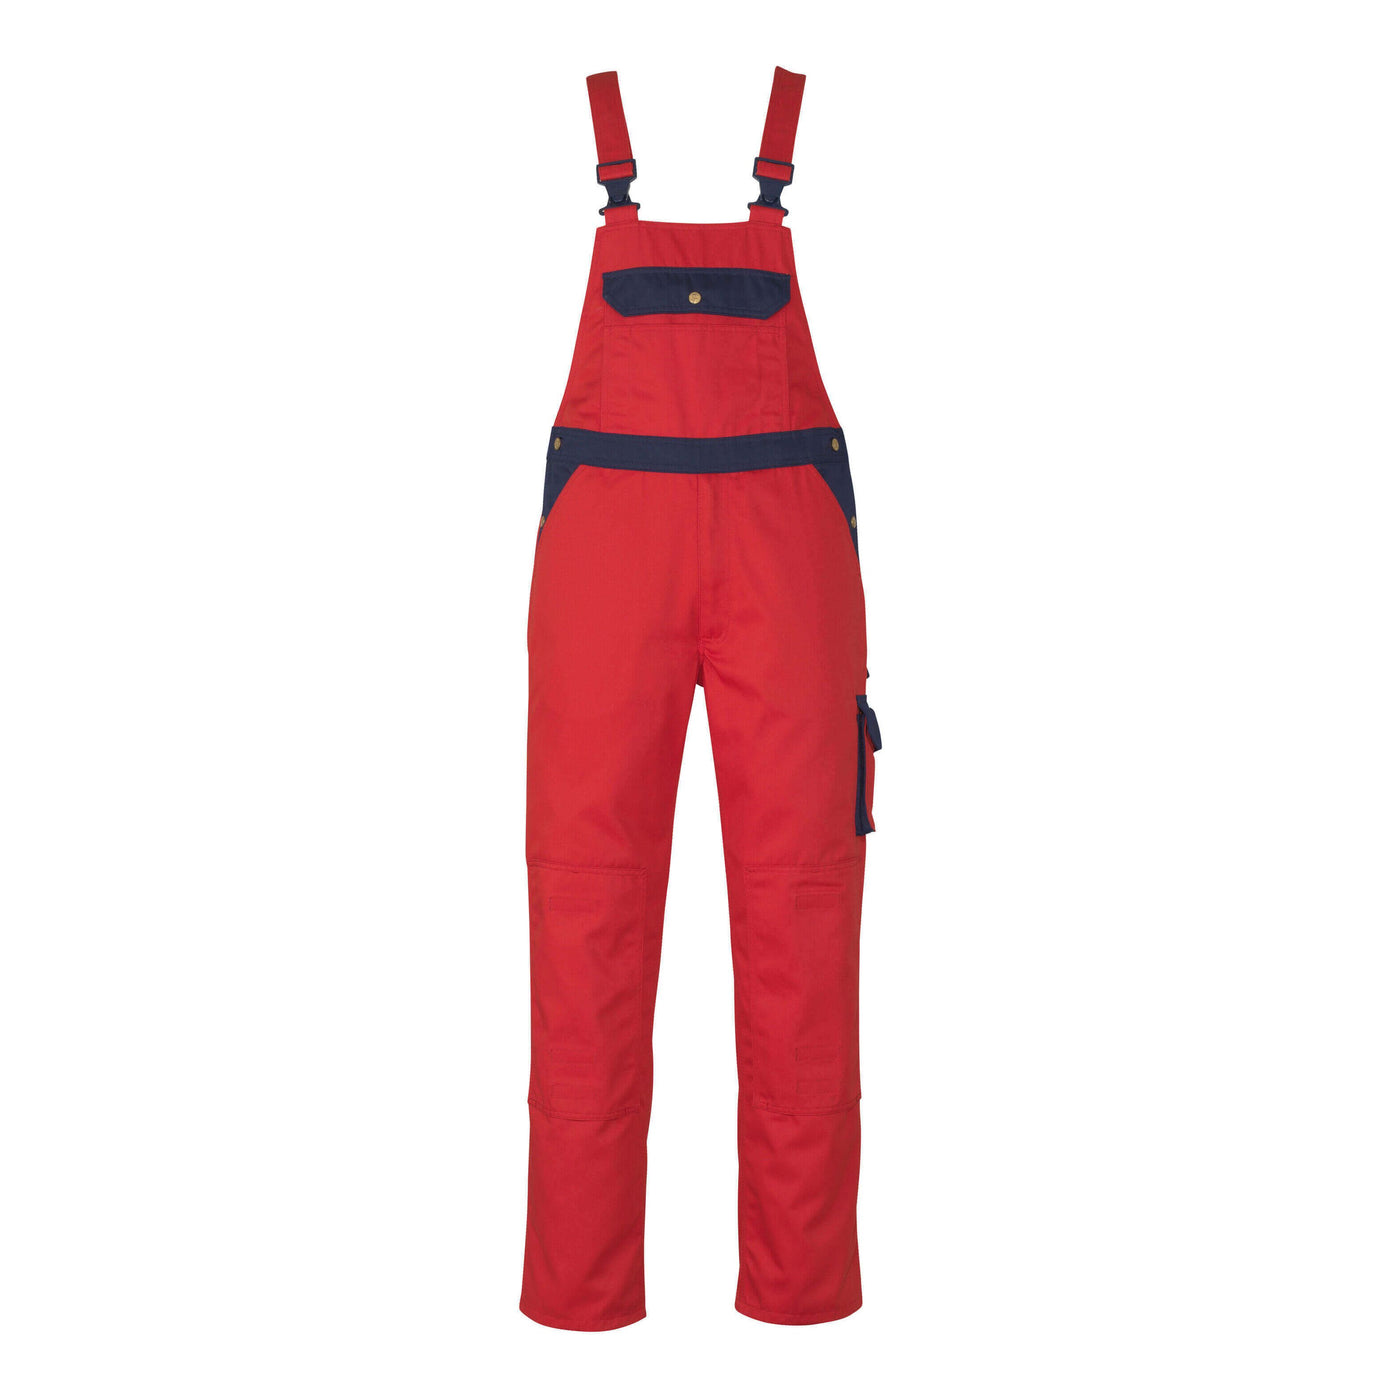 Mascot Milano Bib Brace Overall 00969-430 Front #colour_red-navy-blue